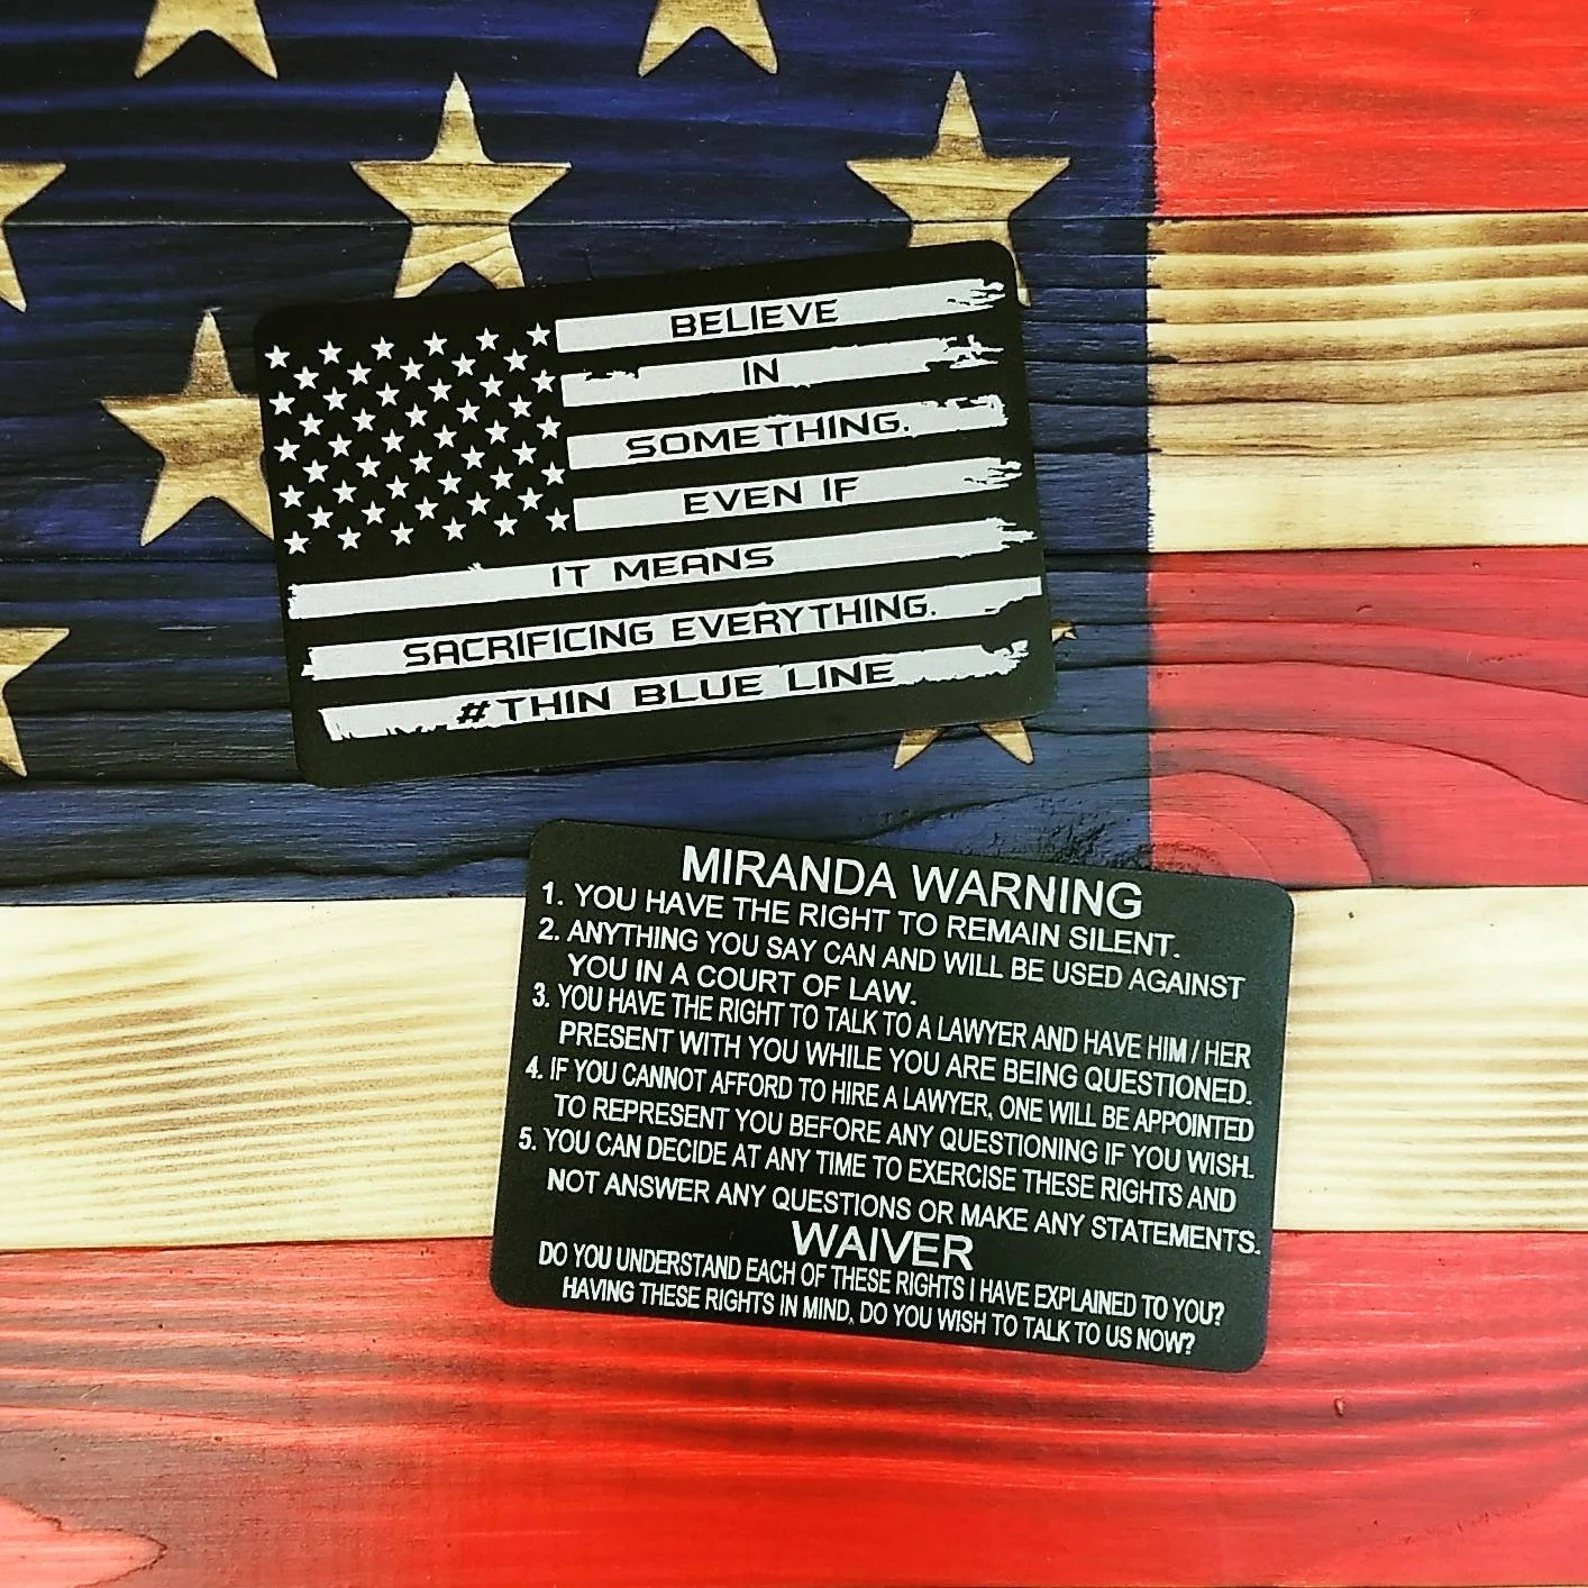 Metal Miranda Cards with American Flag and Sacrifice Quote